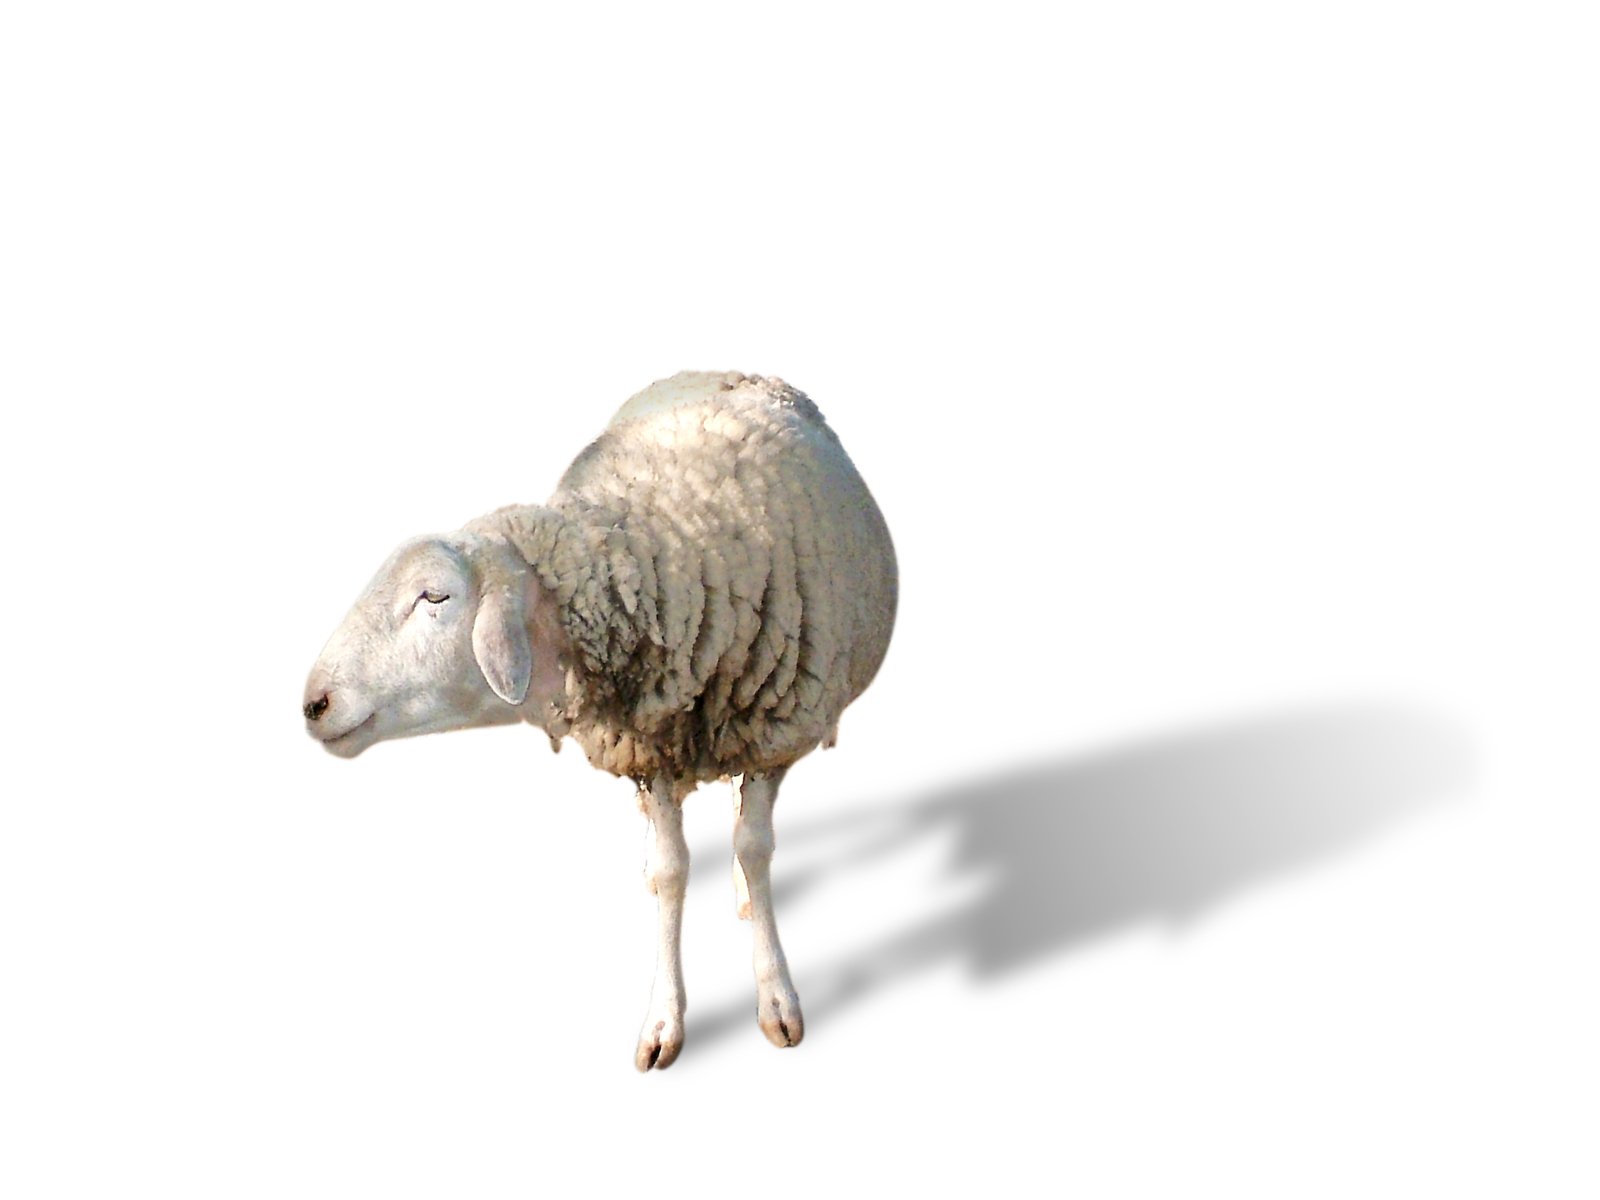 a sheep with wool standing on white background